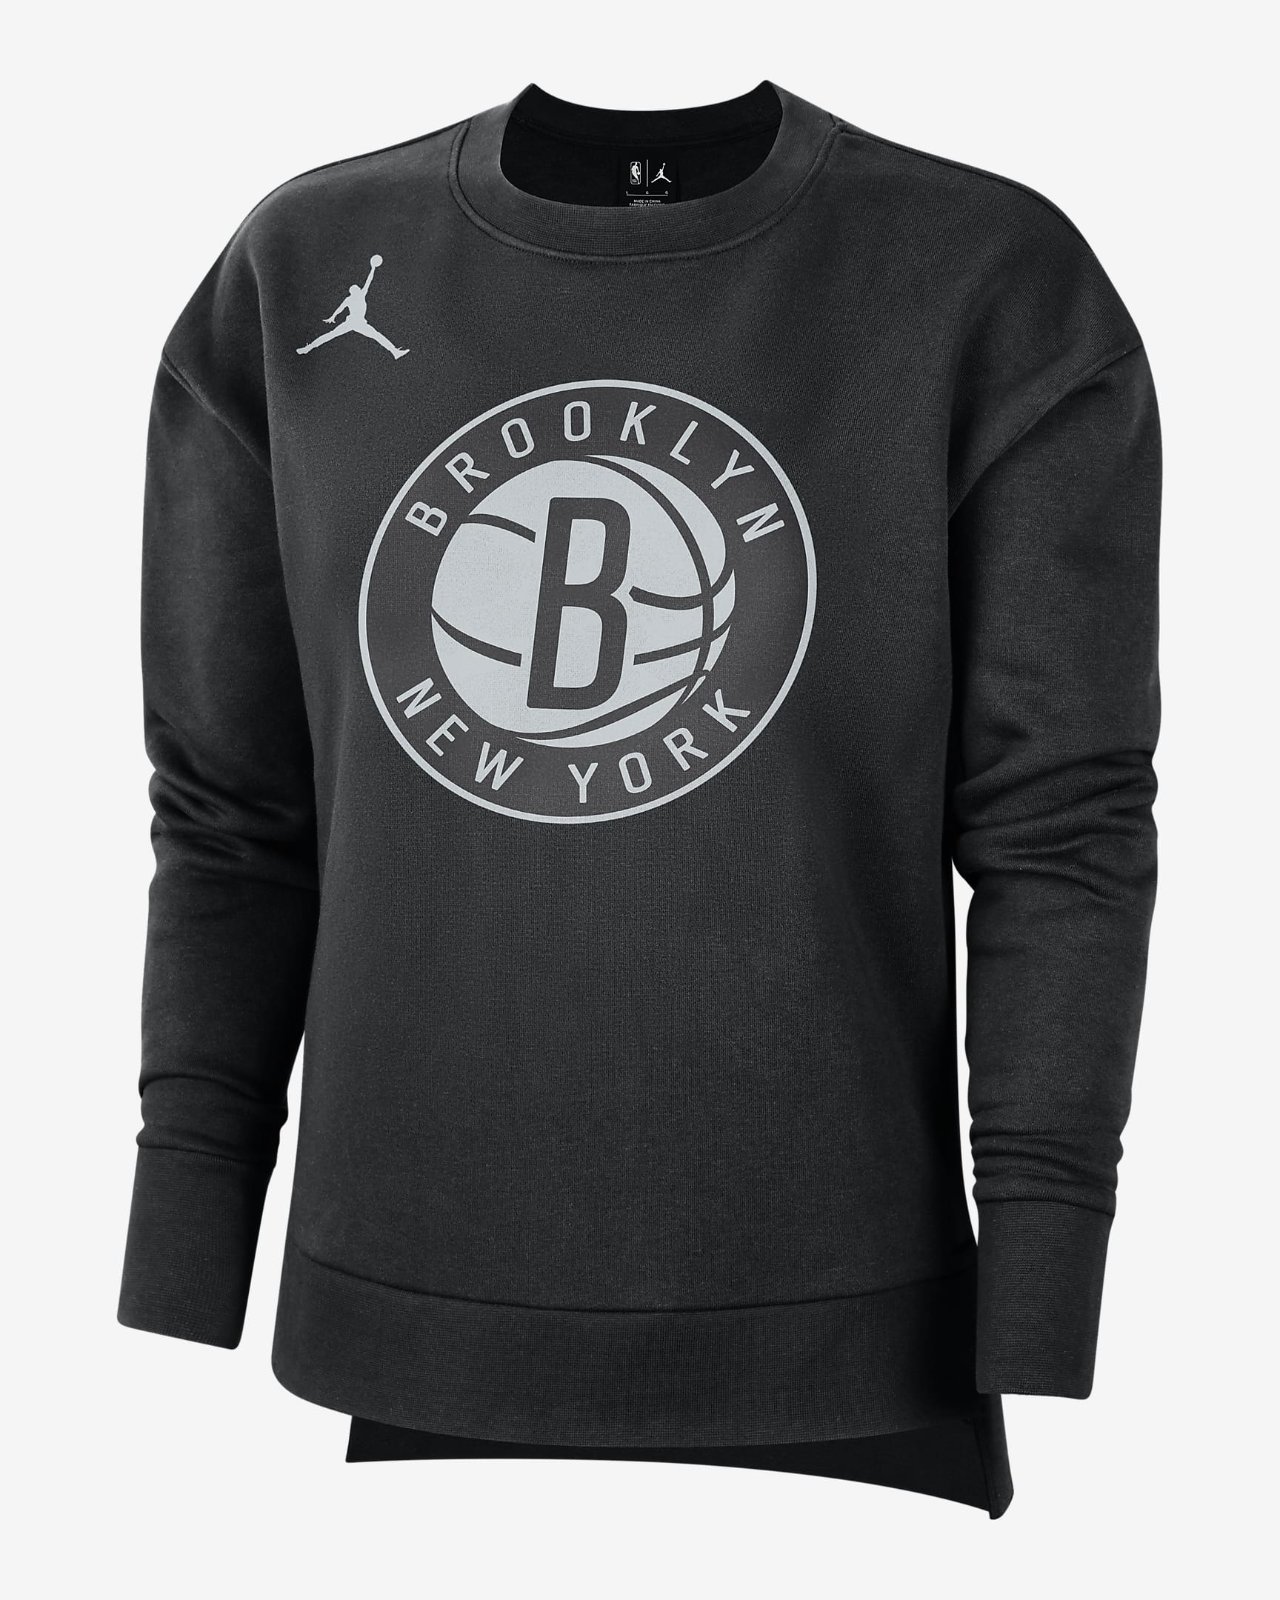 The Nets get awesome new jerseys inspired by the Brooklyn Bridge - Curbed NY